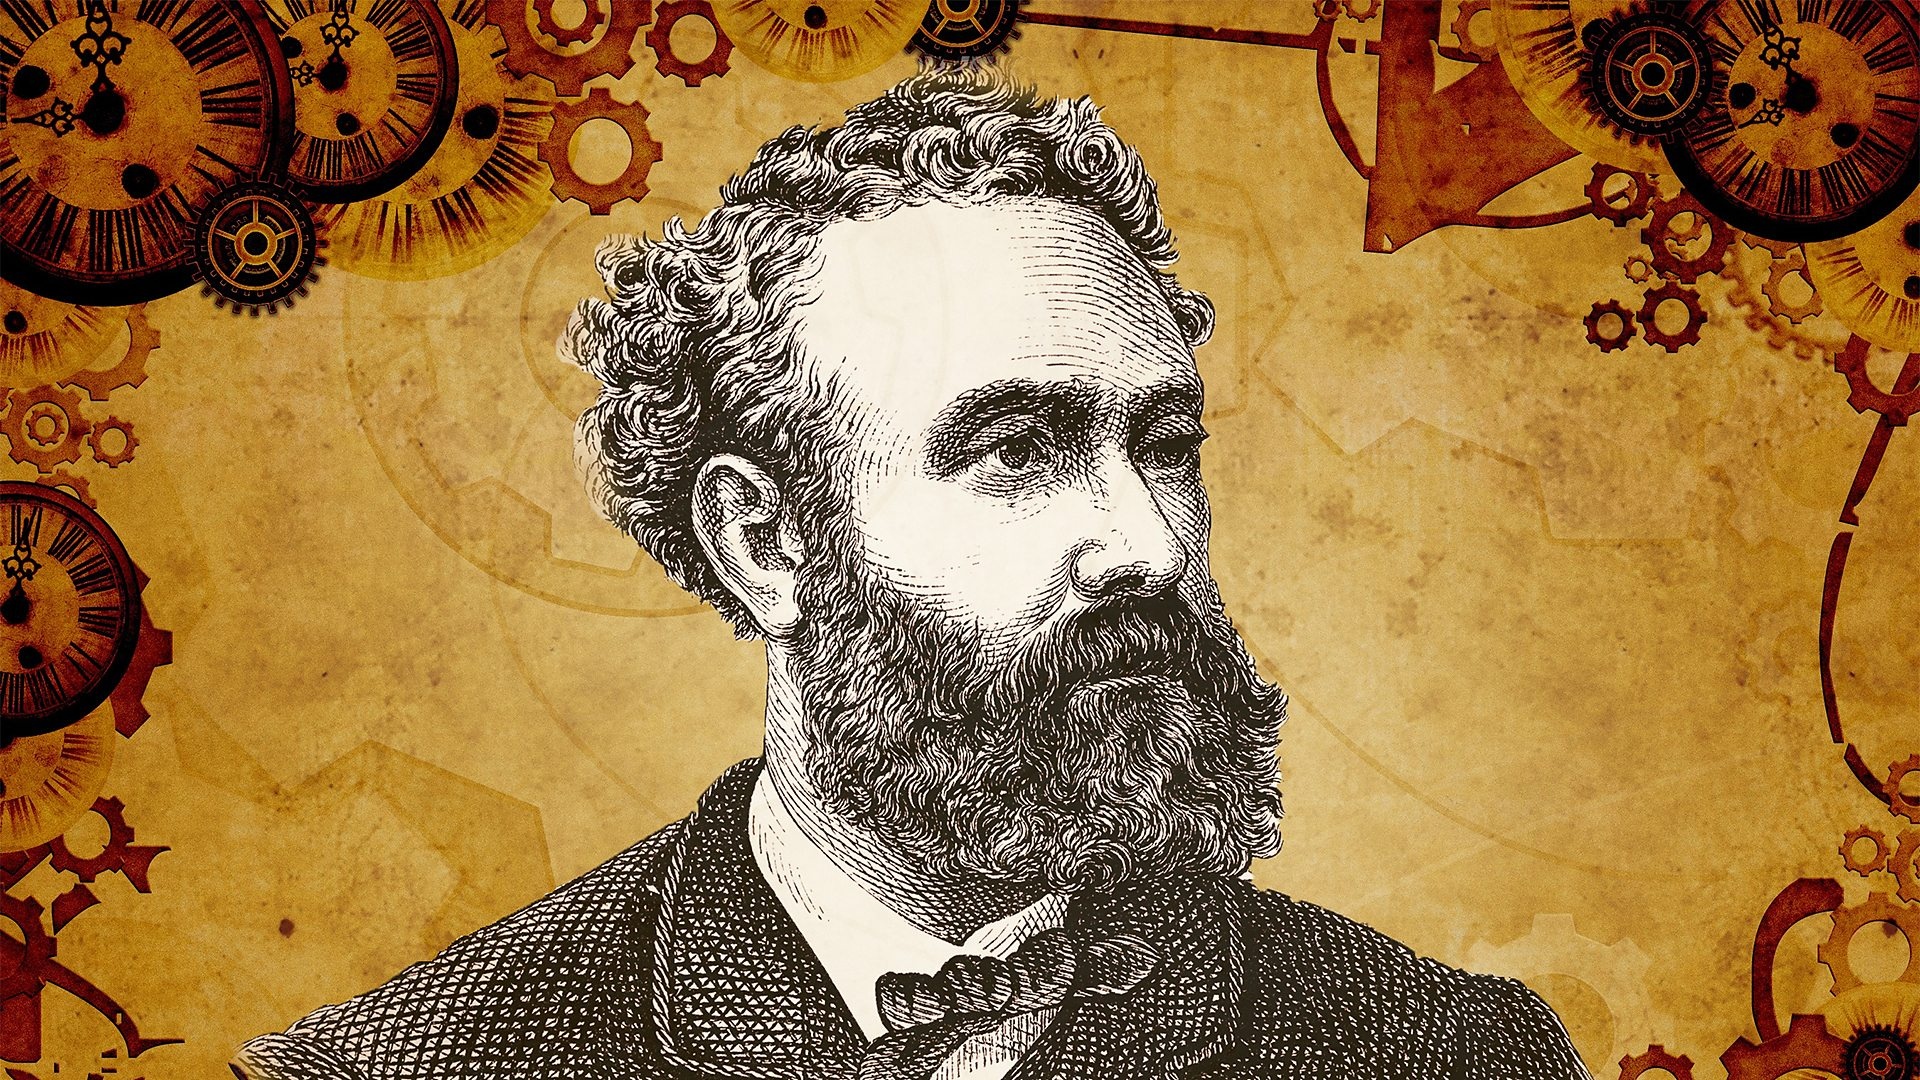 Jules Verne, BBC Radio 4 Extra, Steampunk Hero, Journey to the Center of the Earth, 1920x1080 Full HD Desktop